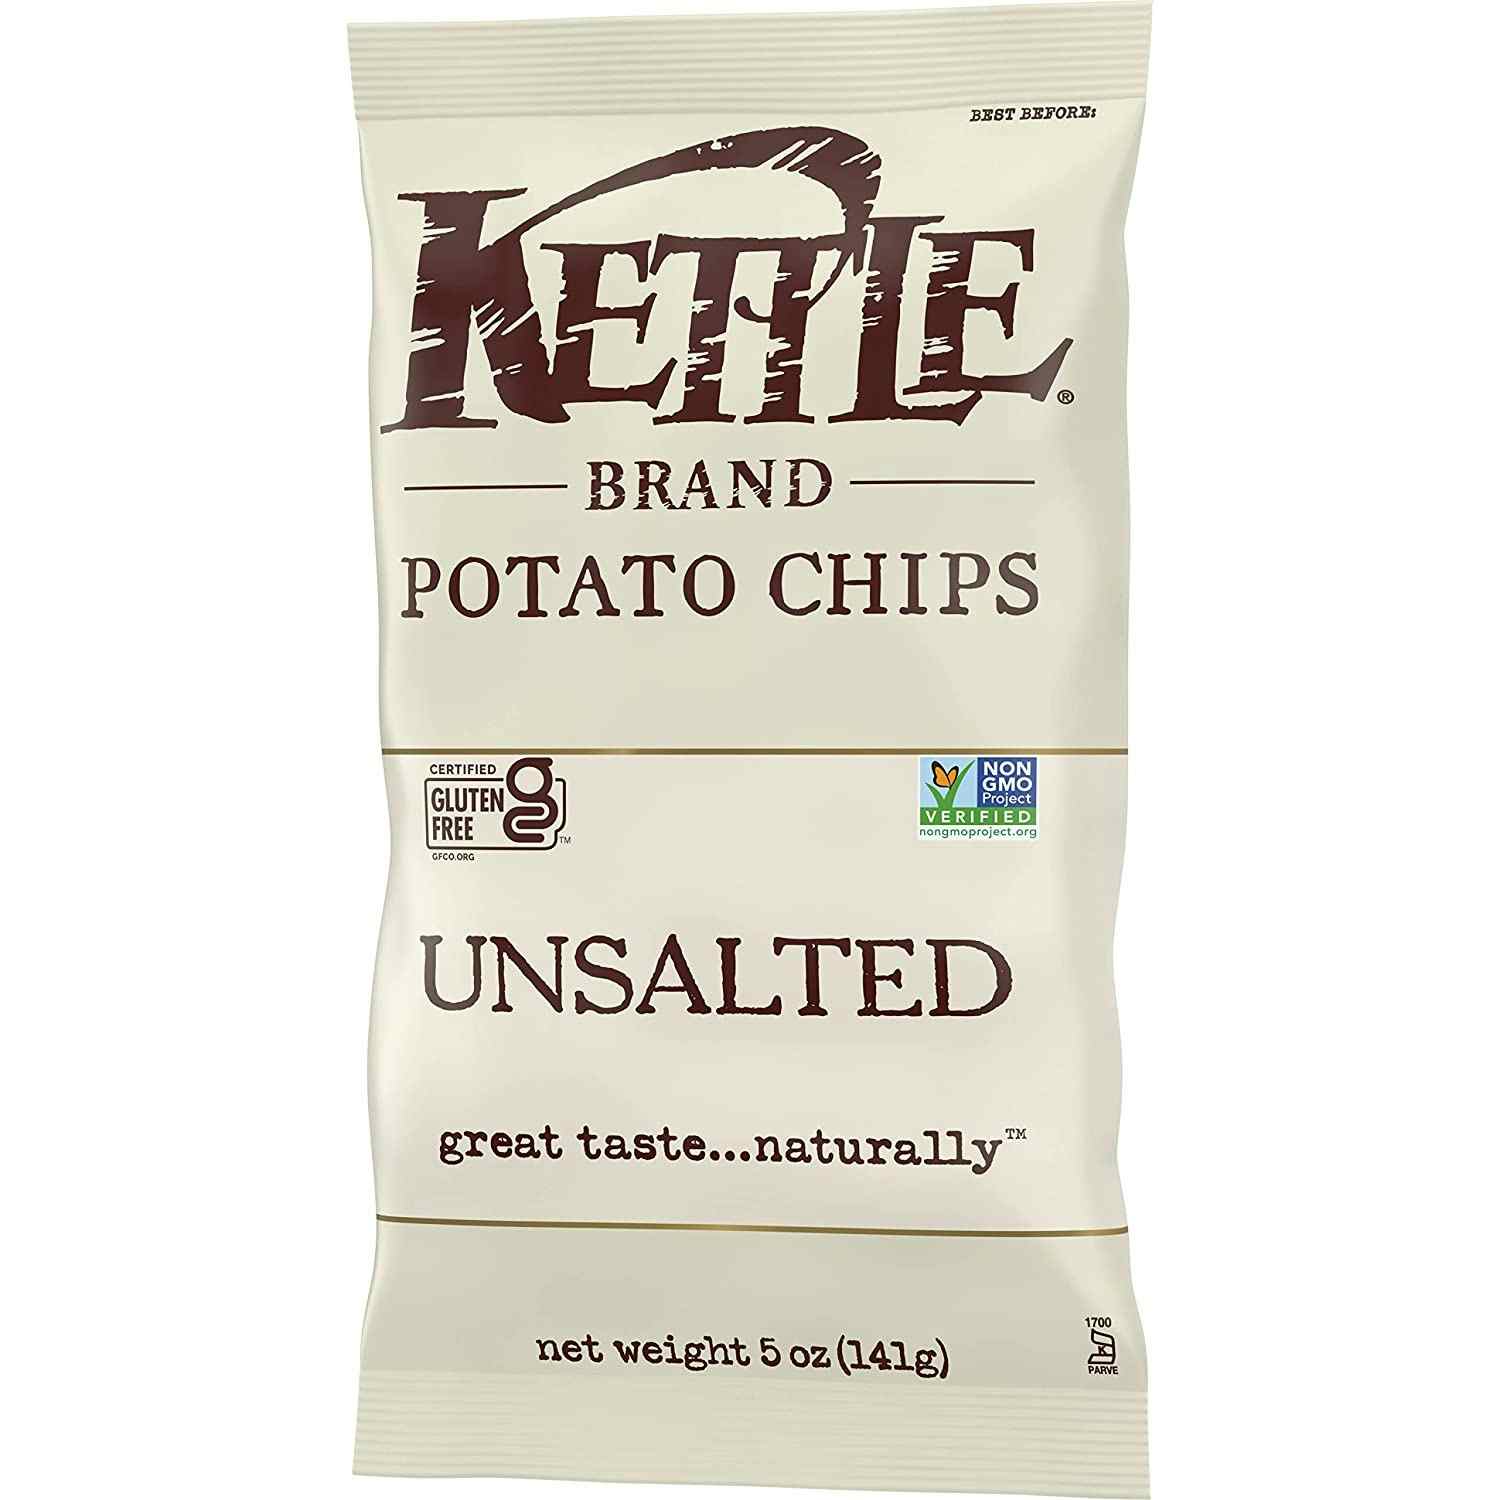 Kettle Brand Unsalted Potato Chips